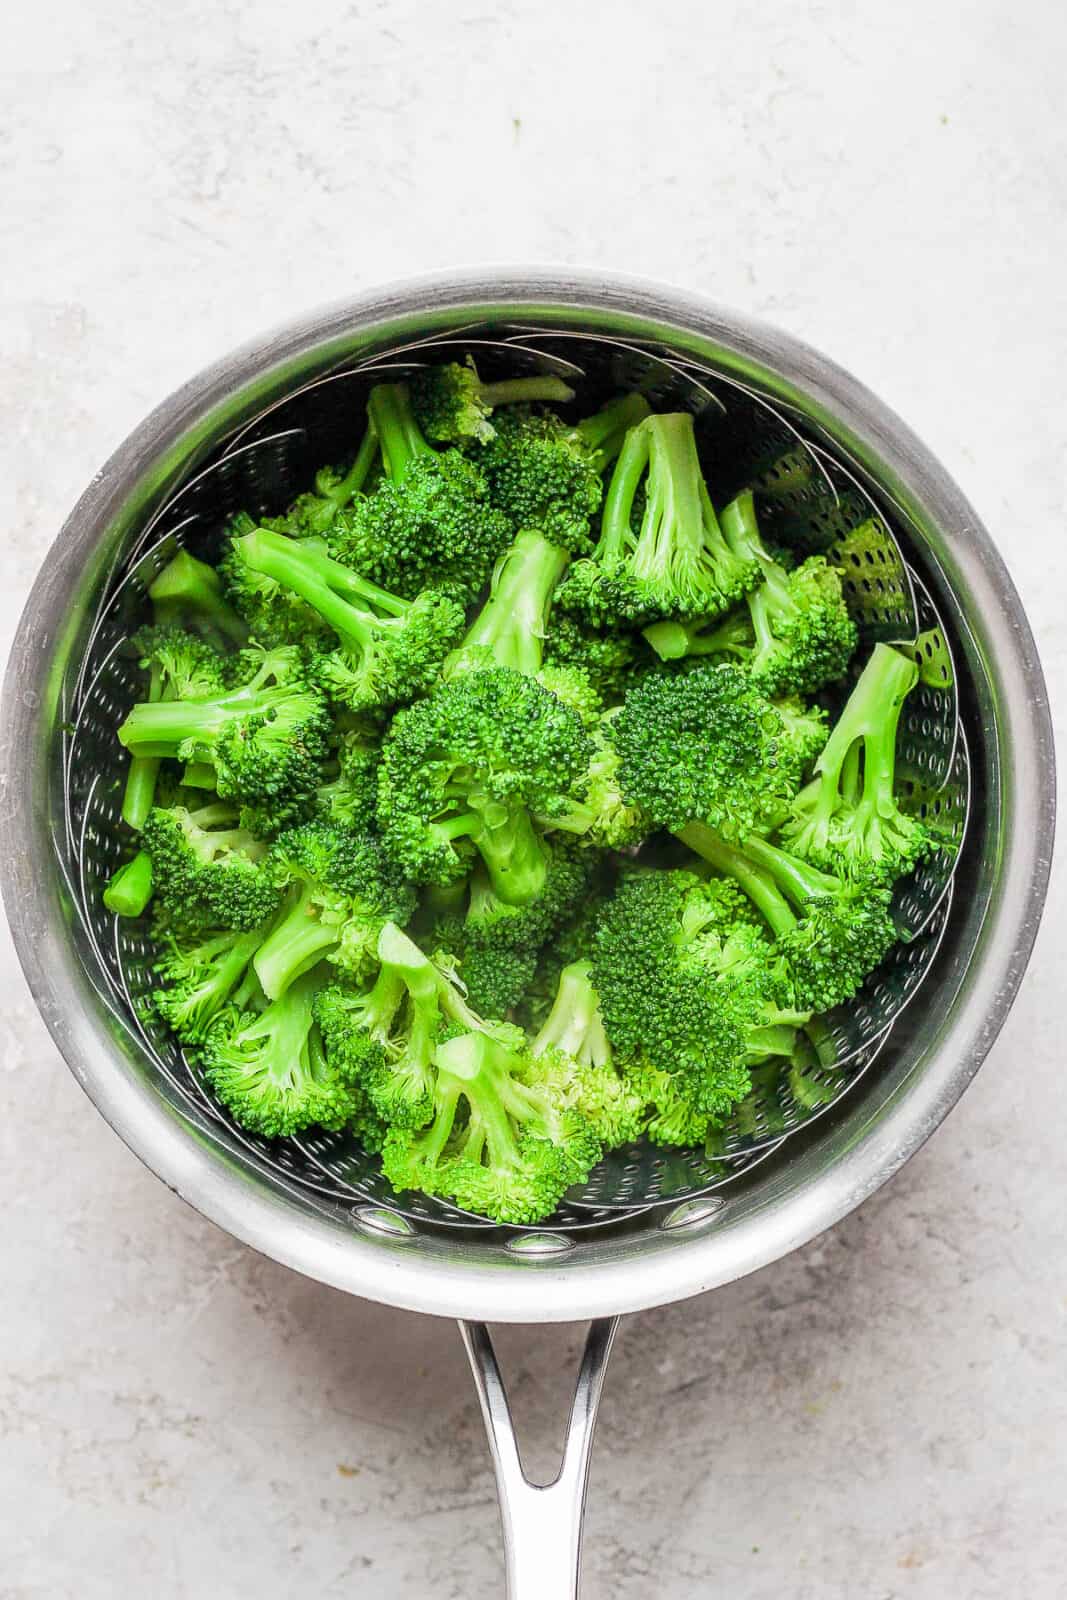 A saucepan with steamed broccoli inside.